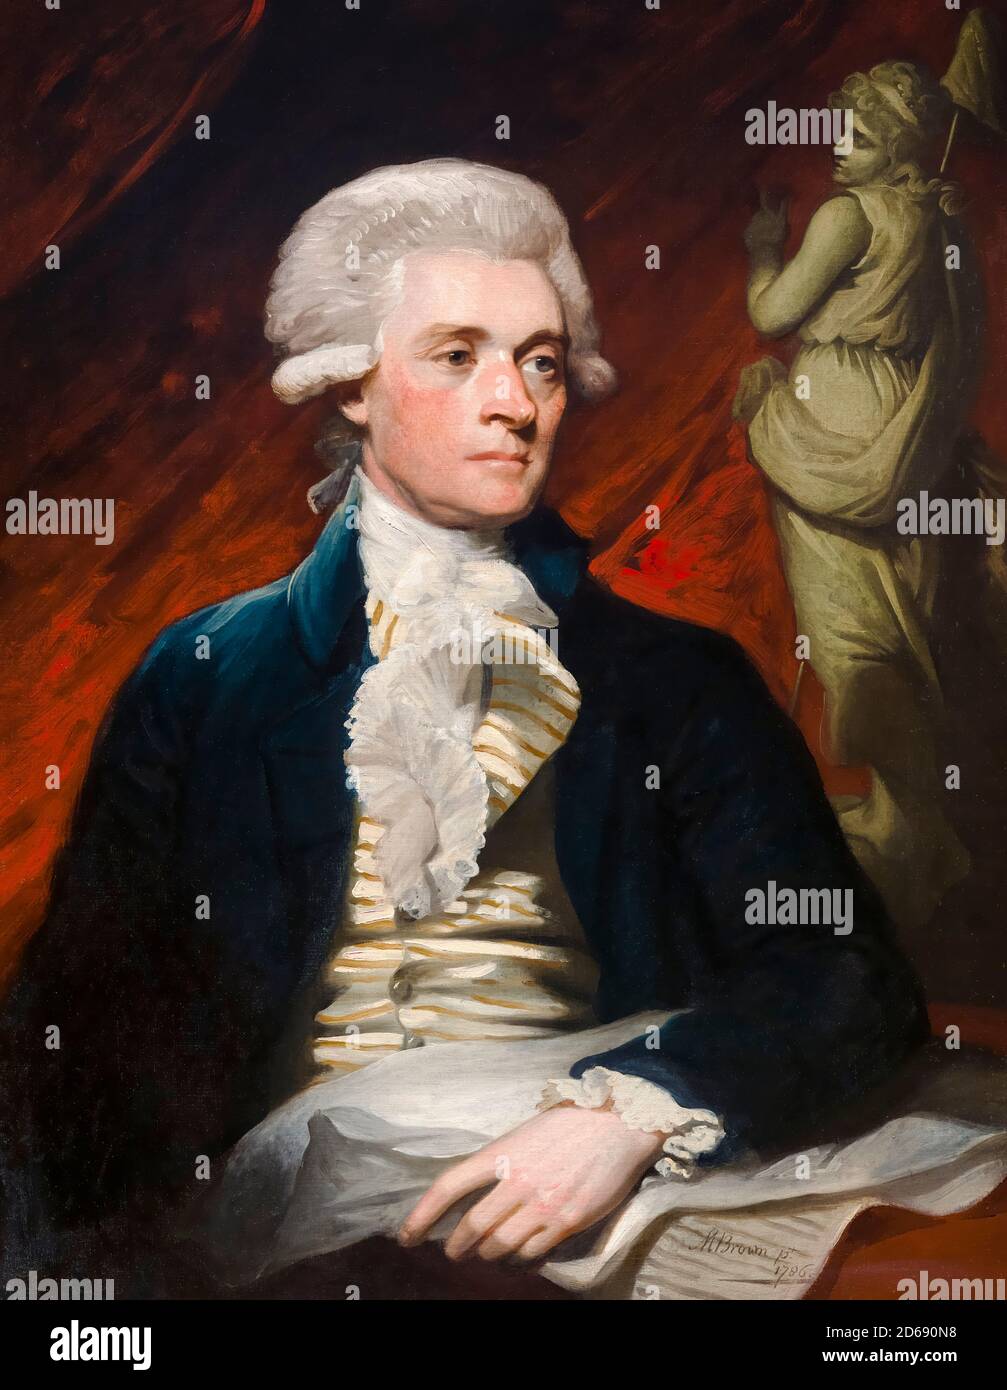 Thomas Jefferson (1743-1826), American statesman and Founding Father who served as the 3rd President of the United States, portrait painting by Mather Brown, 1786 Stock Photo